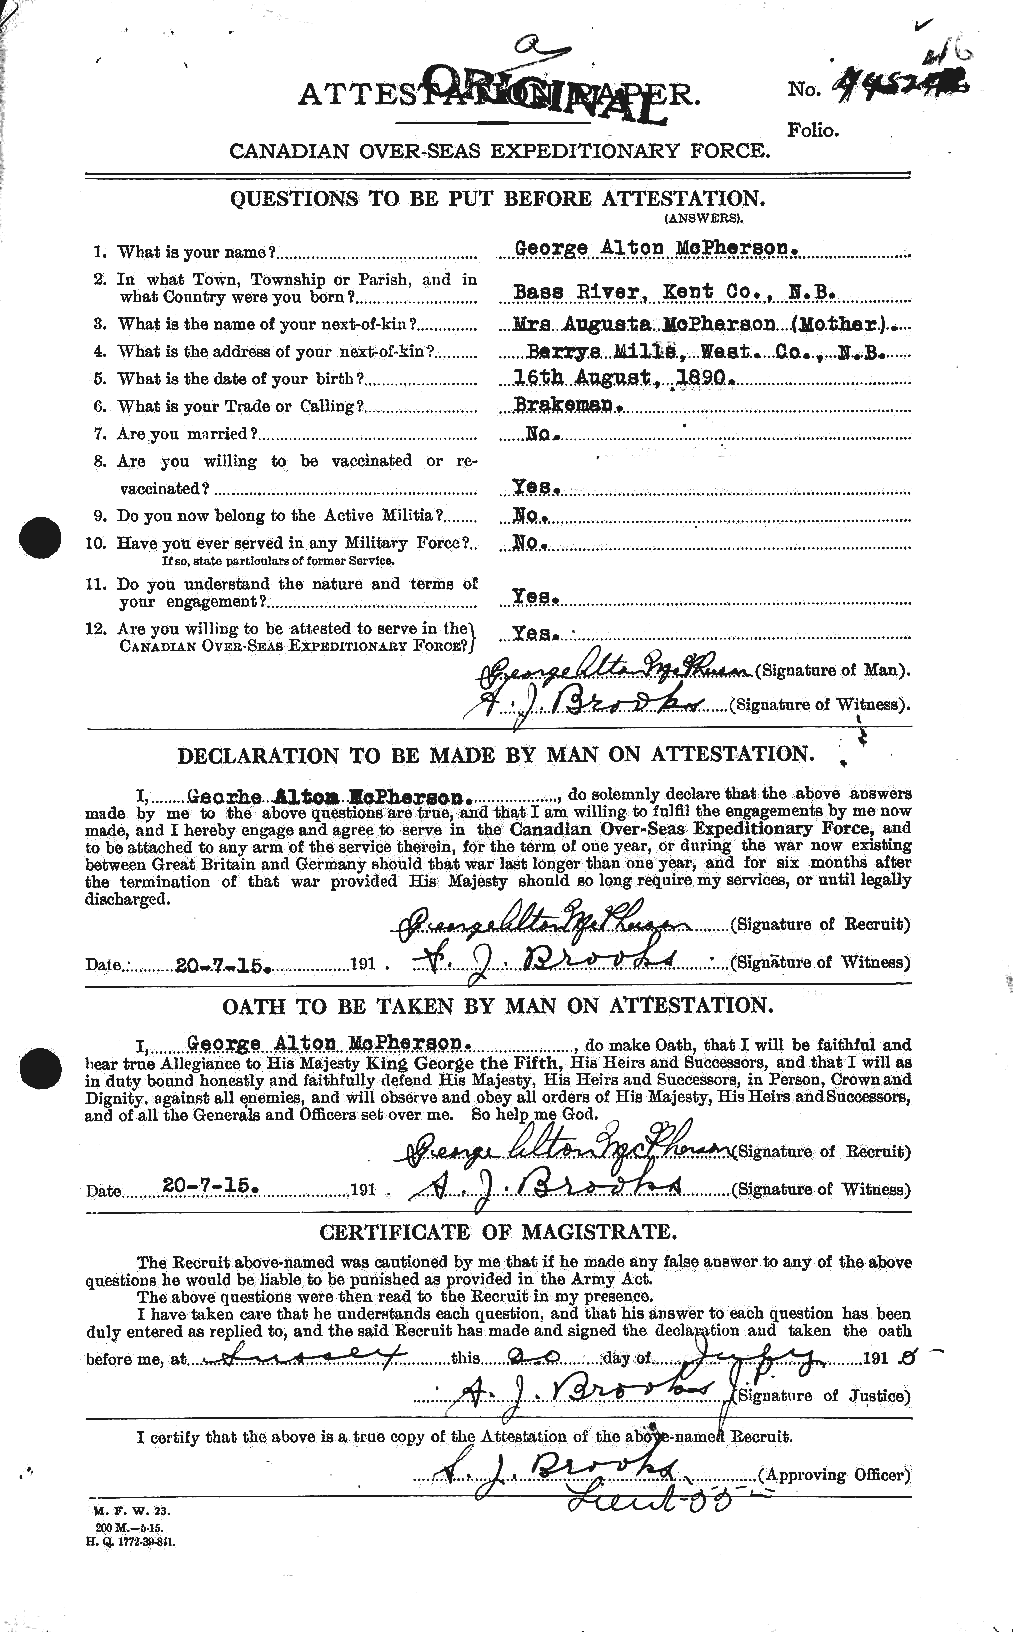 Personnel Records of the First World War - CEF 541558a